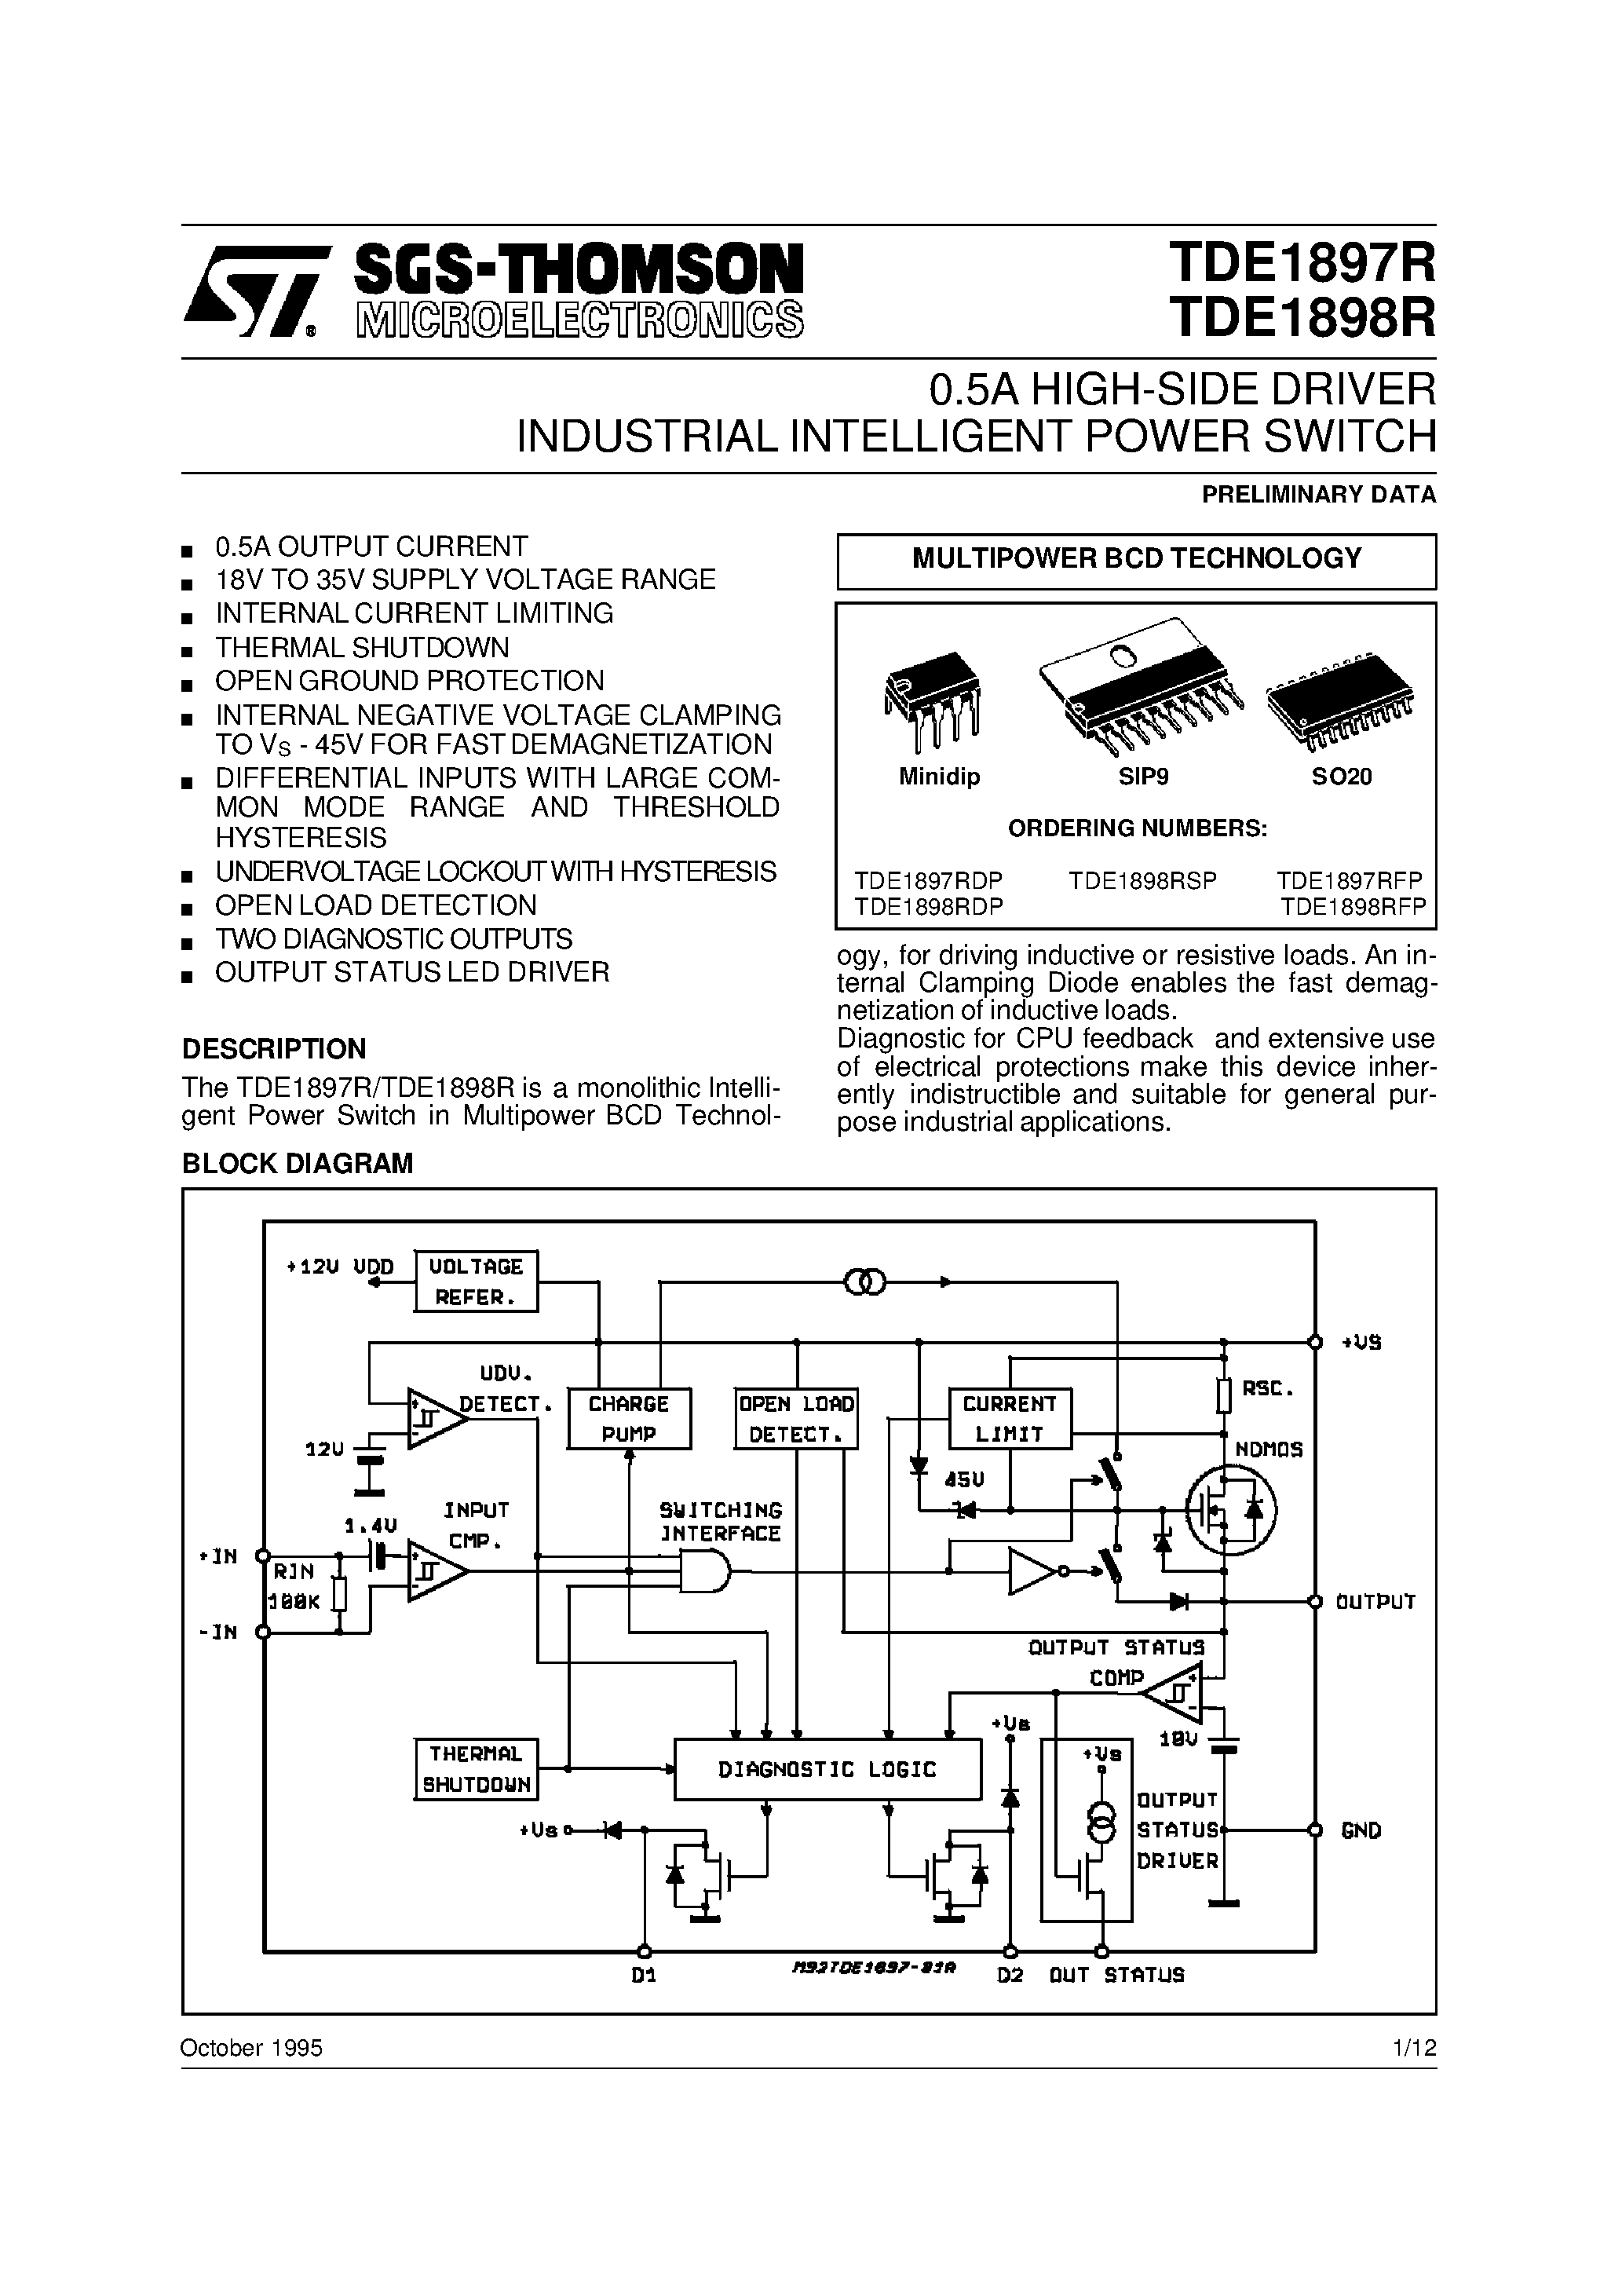 Datasheet TDE1898RDP - 0.5A HIGH-SIDE DRIVER INDUSTRIAL INTELLIGENT POWER SWITCH page 1